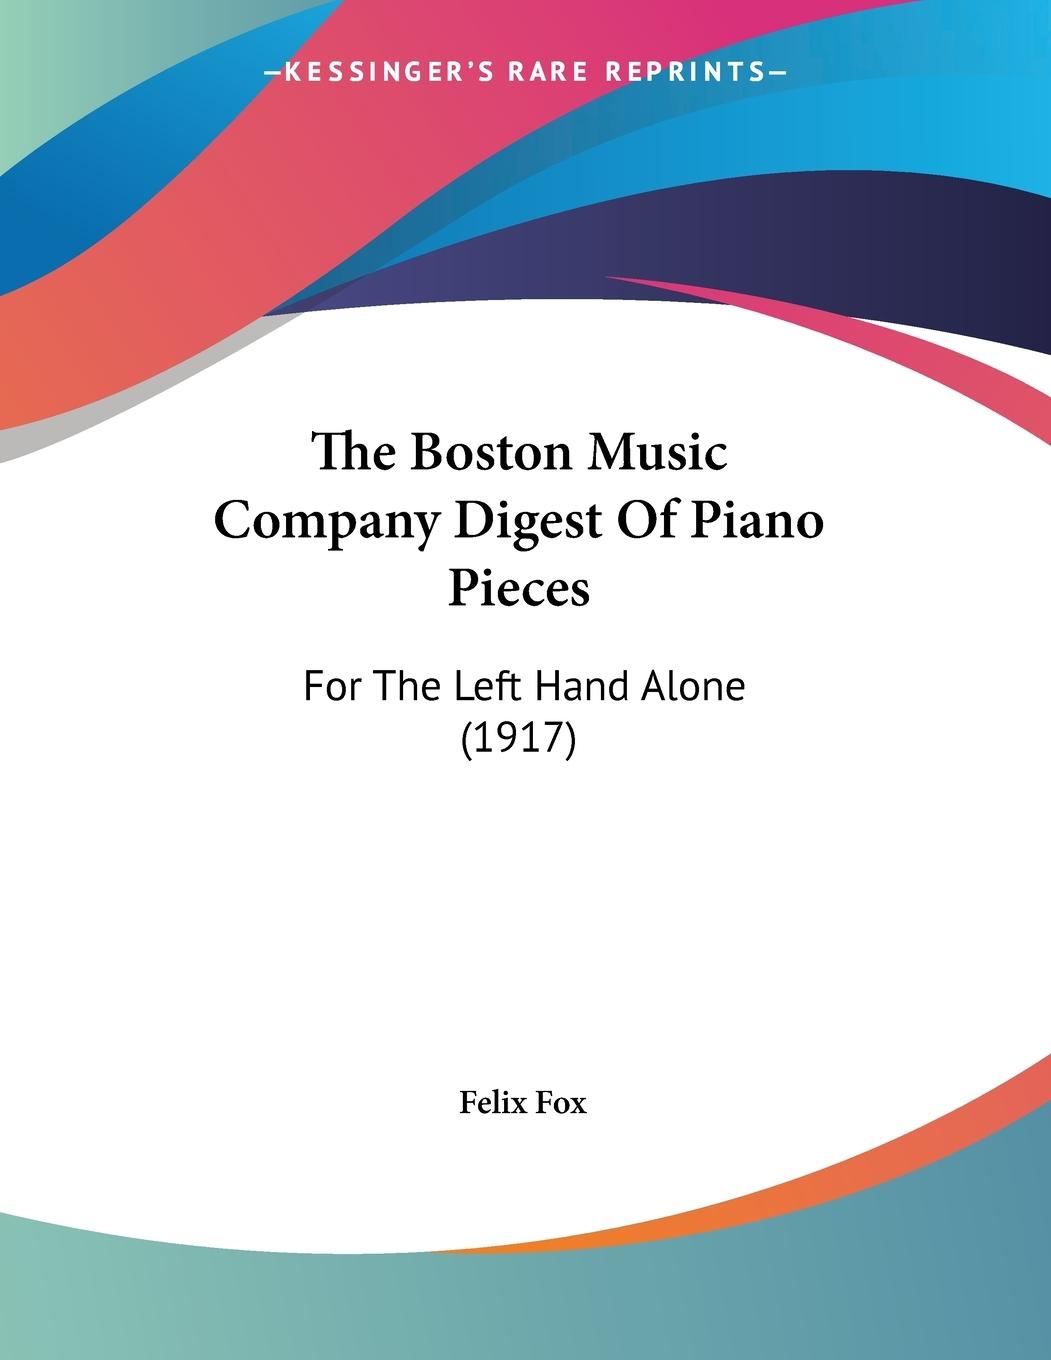 The Boston Music Company Digest Of Piano Pieces